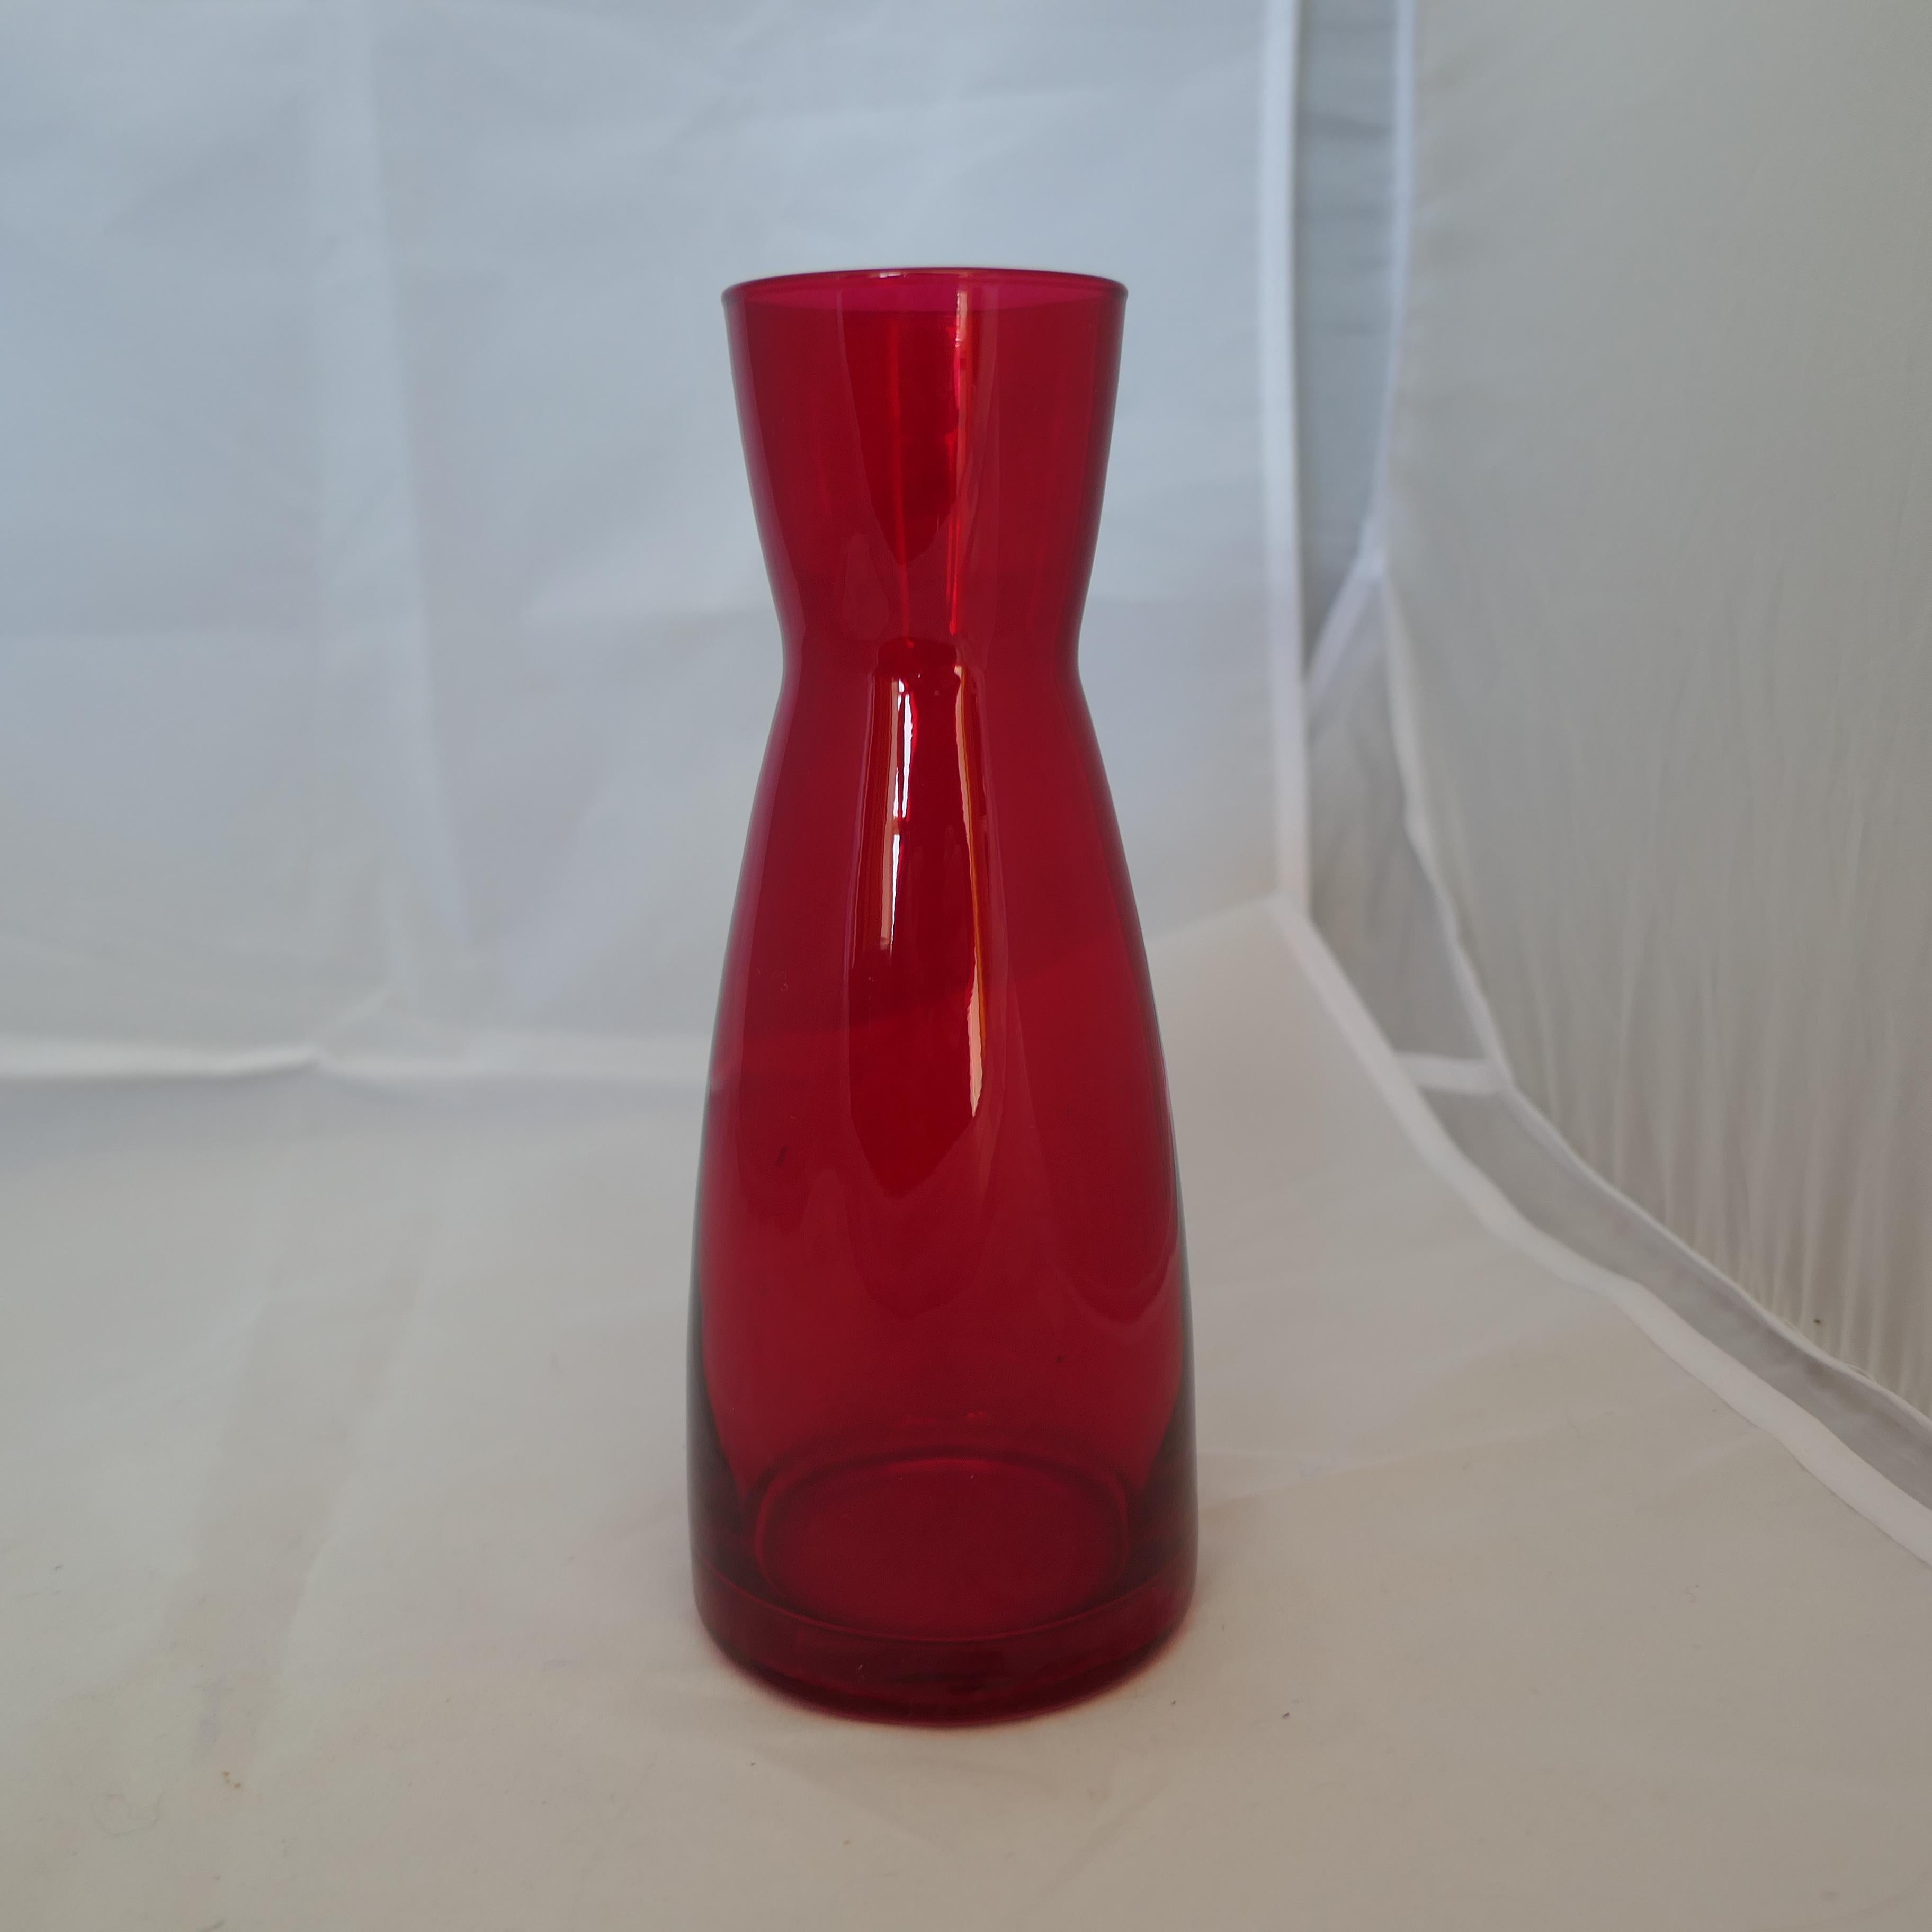 A Pair of Ypsilon Red Glass Carafes by Bormioli Rocco 

Beautiful red glass carafes by Bormioli Rocco made in Italy.  
These are the Ypsilon carafes they are tall and elegant with a tapered body into a nice mouth for easy pouring. 
The Perfect Pair